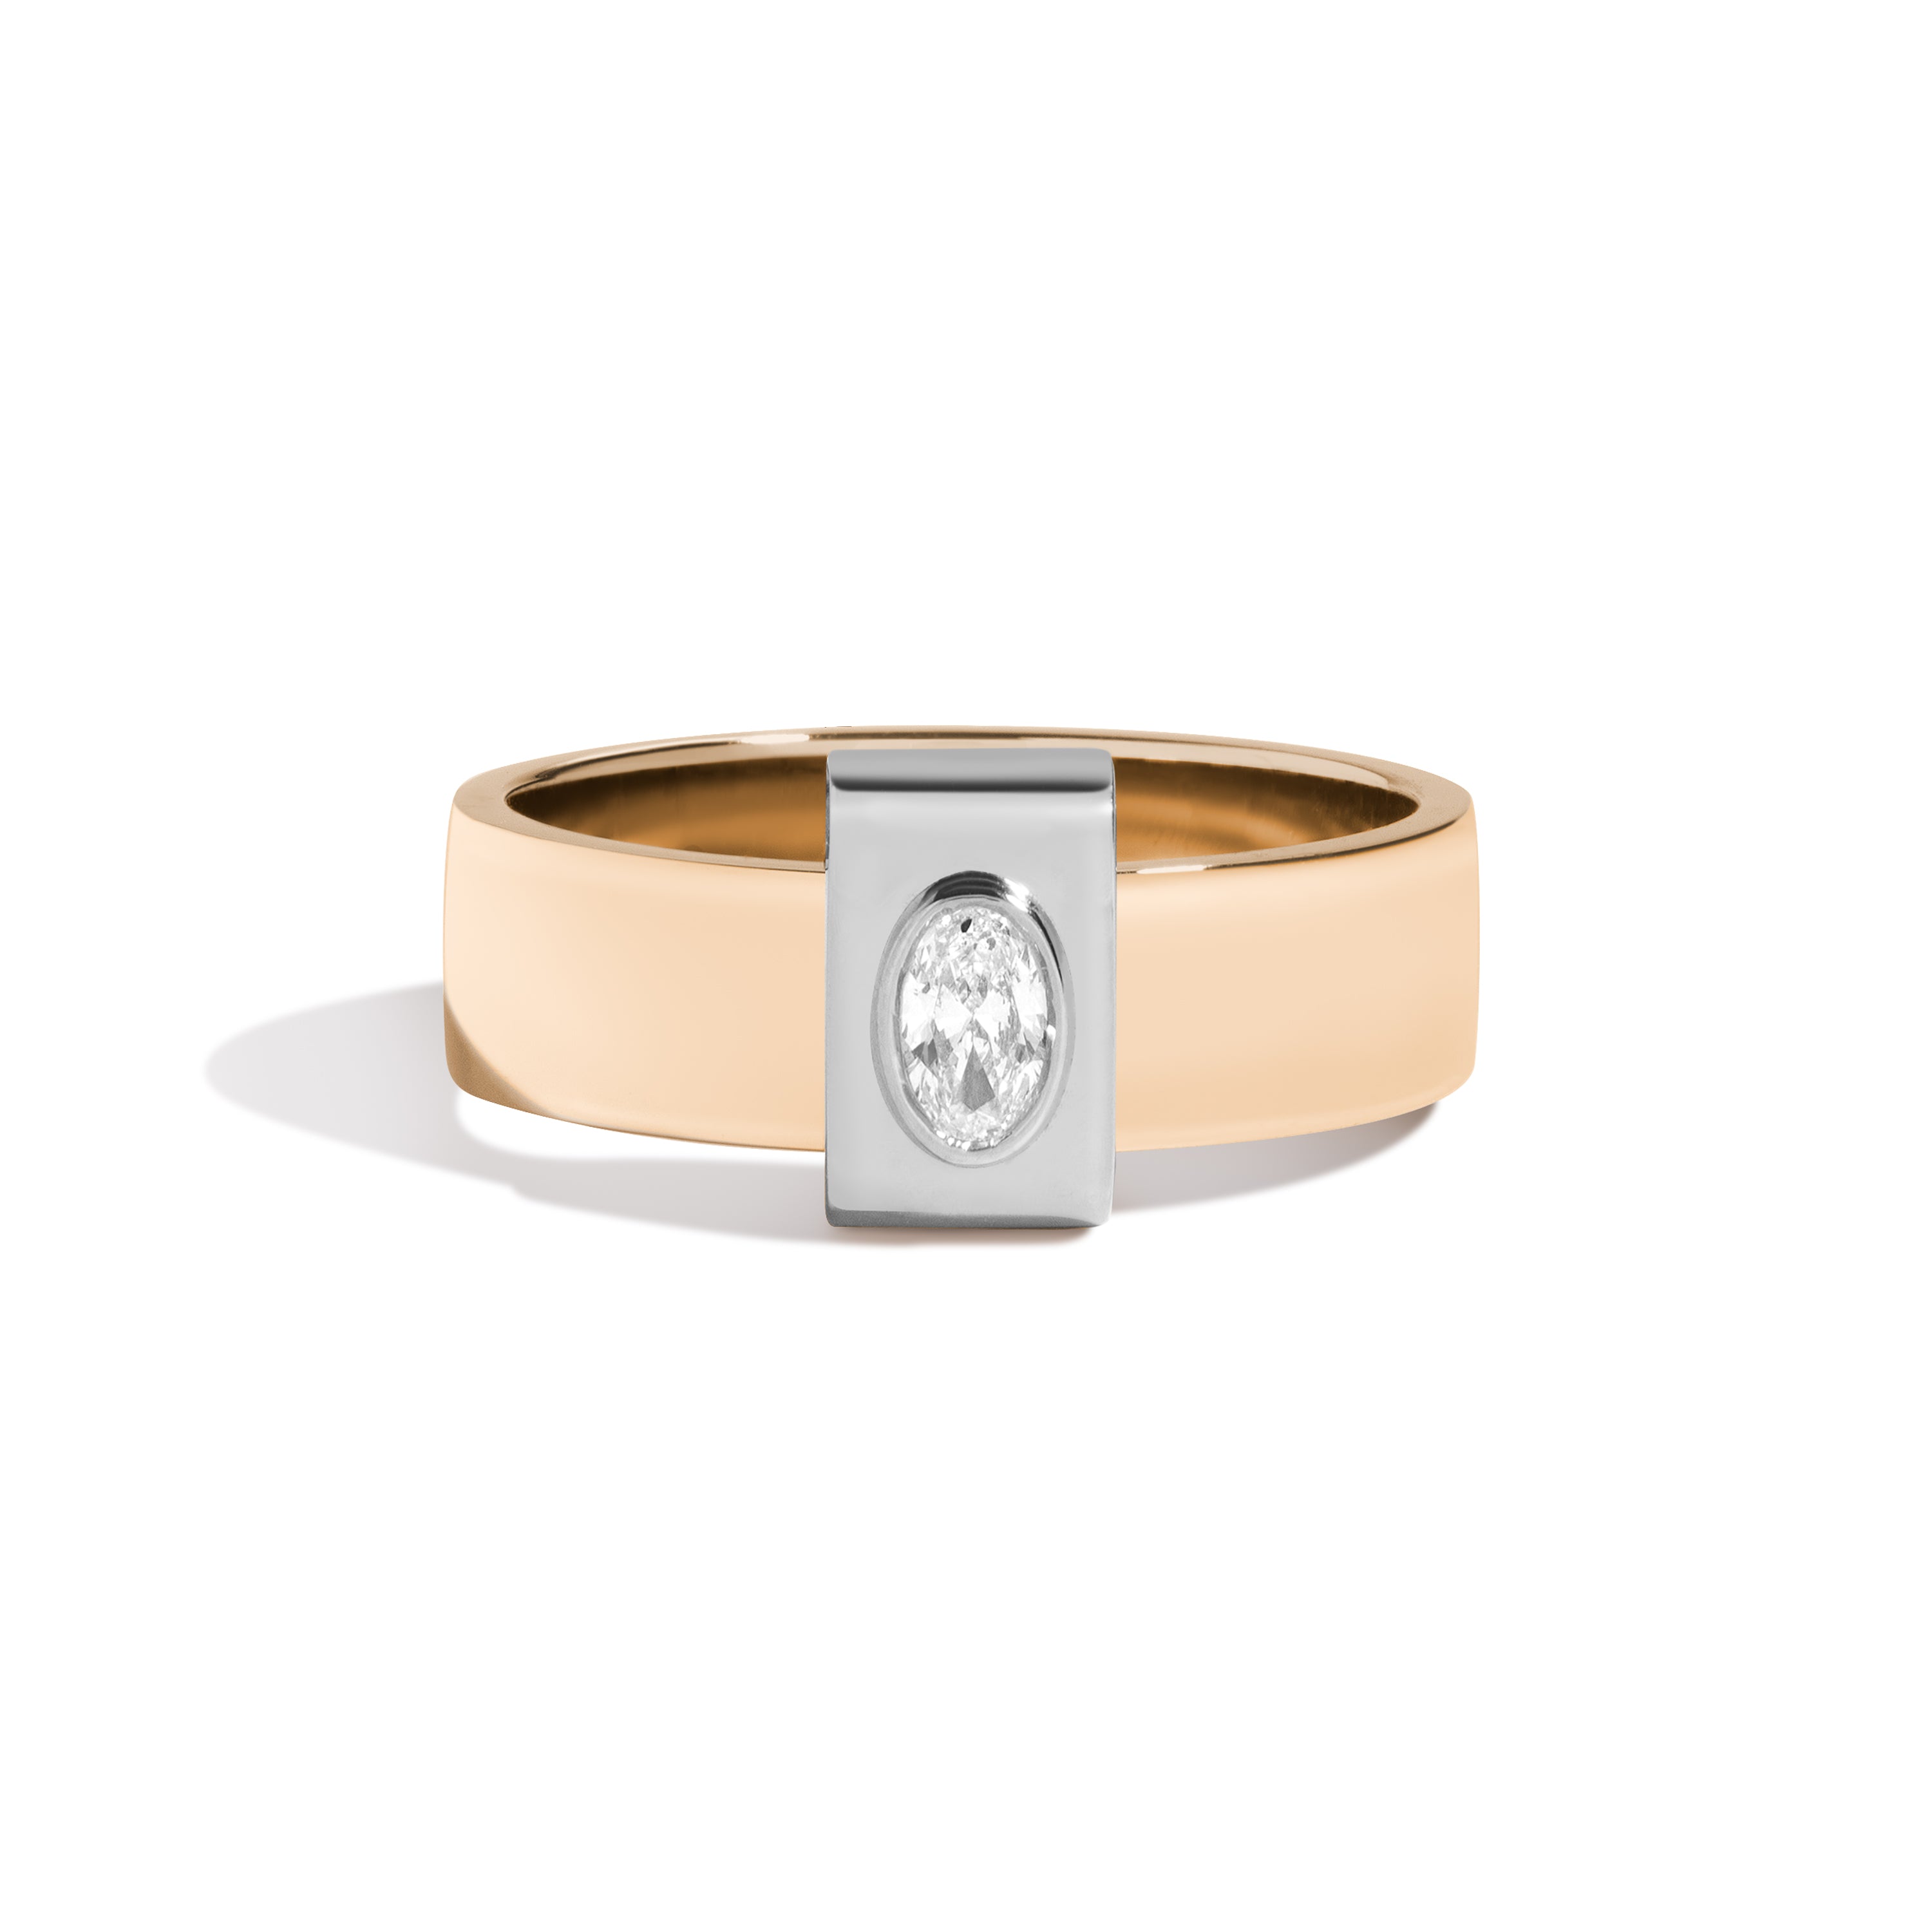 Shahla Karimi Signature 14K Yellow Gold 6mm Band With Oval Platinum Wrap